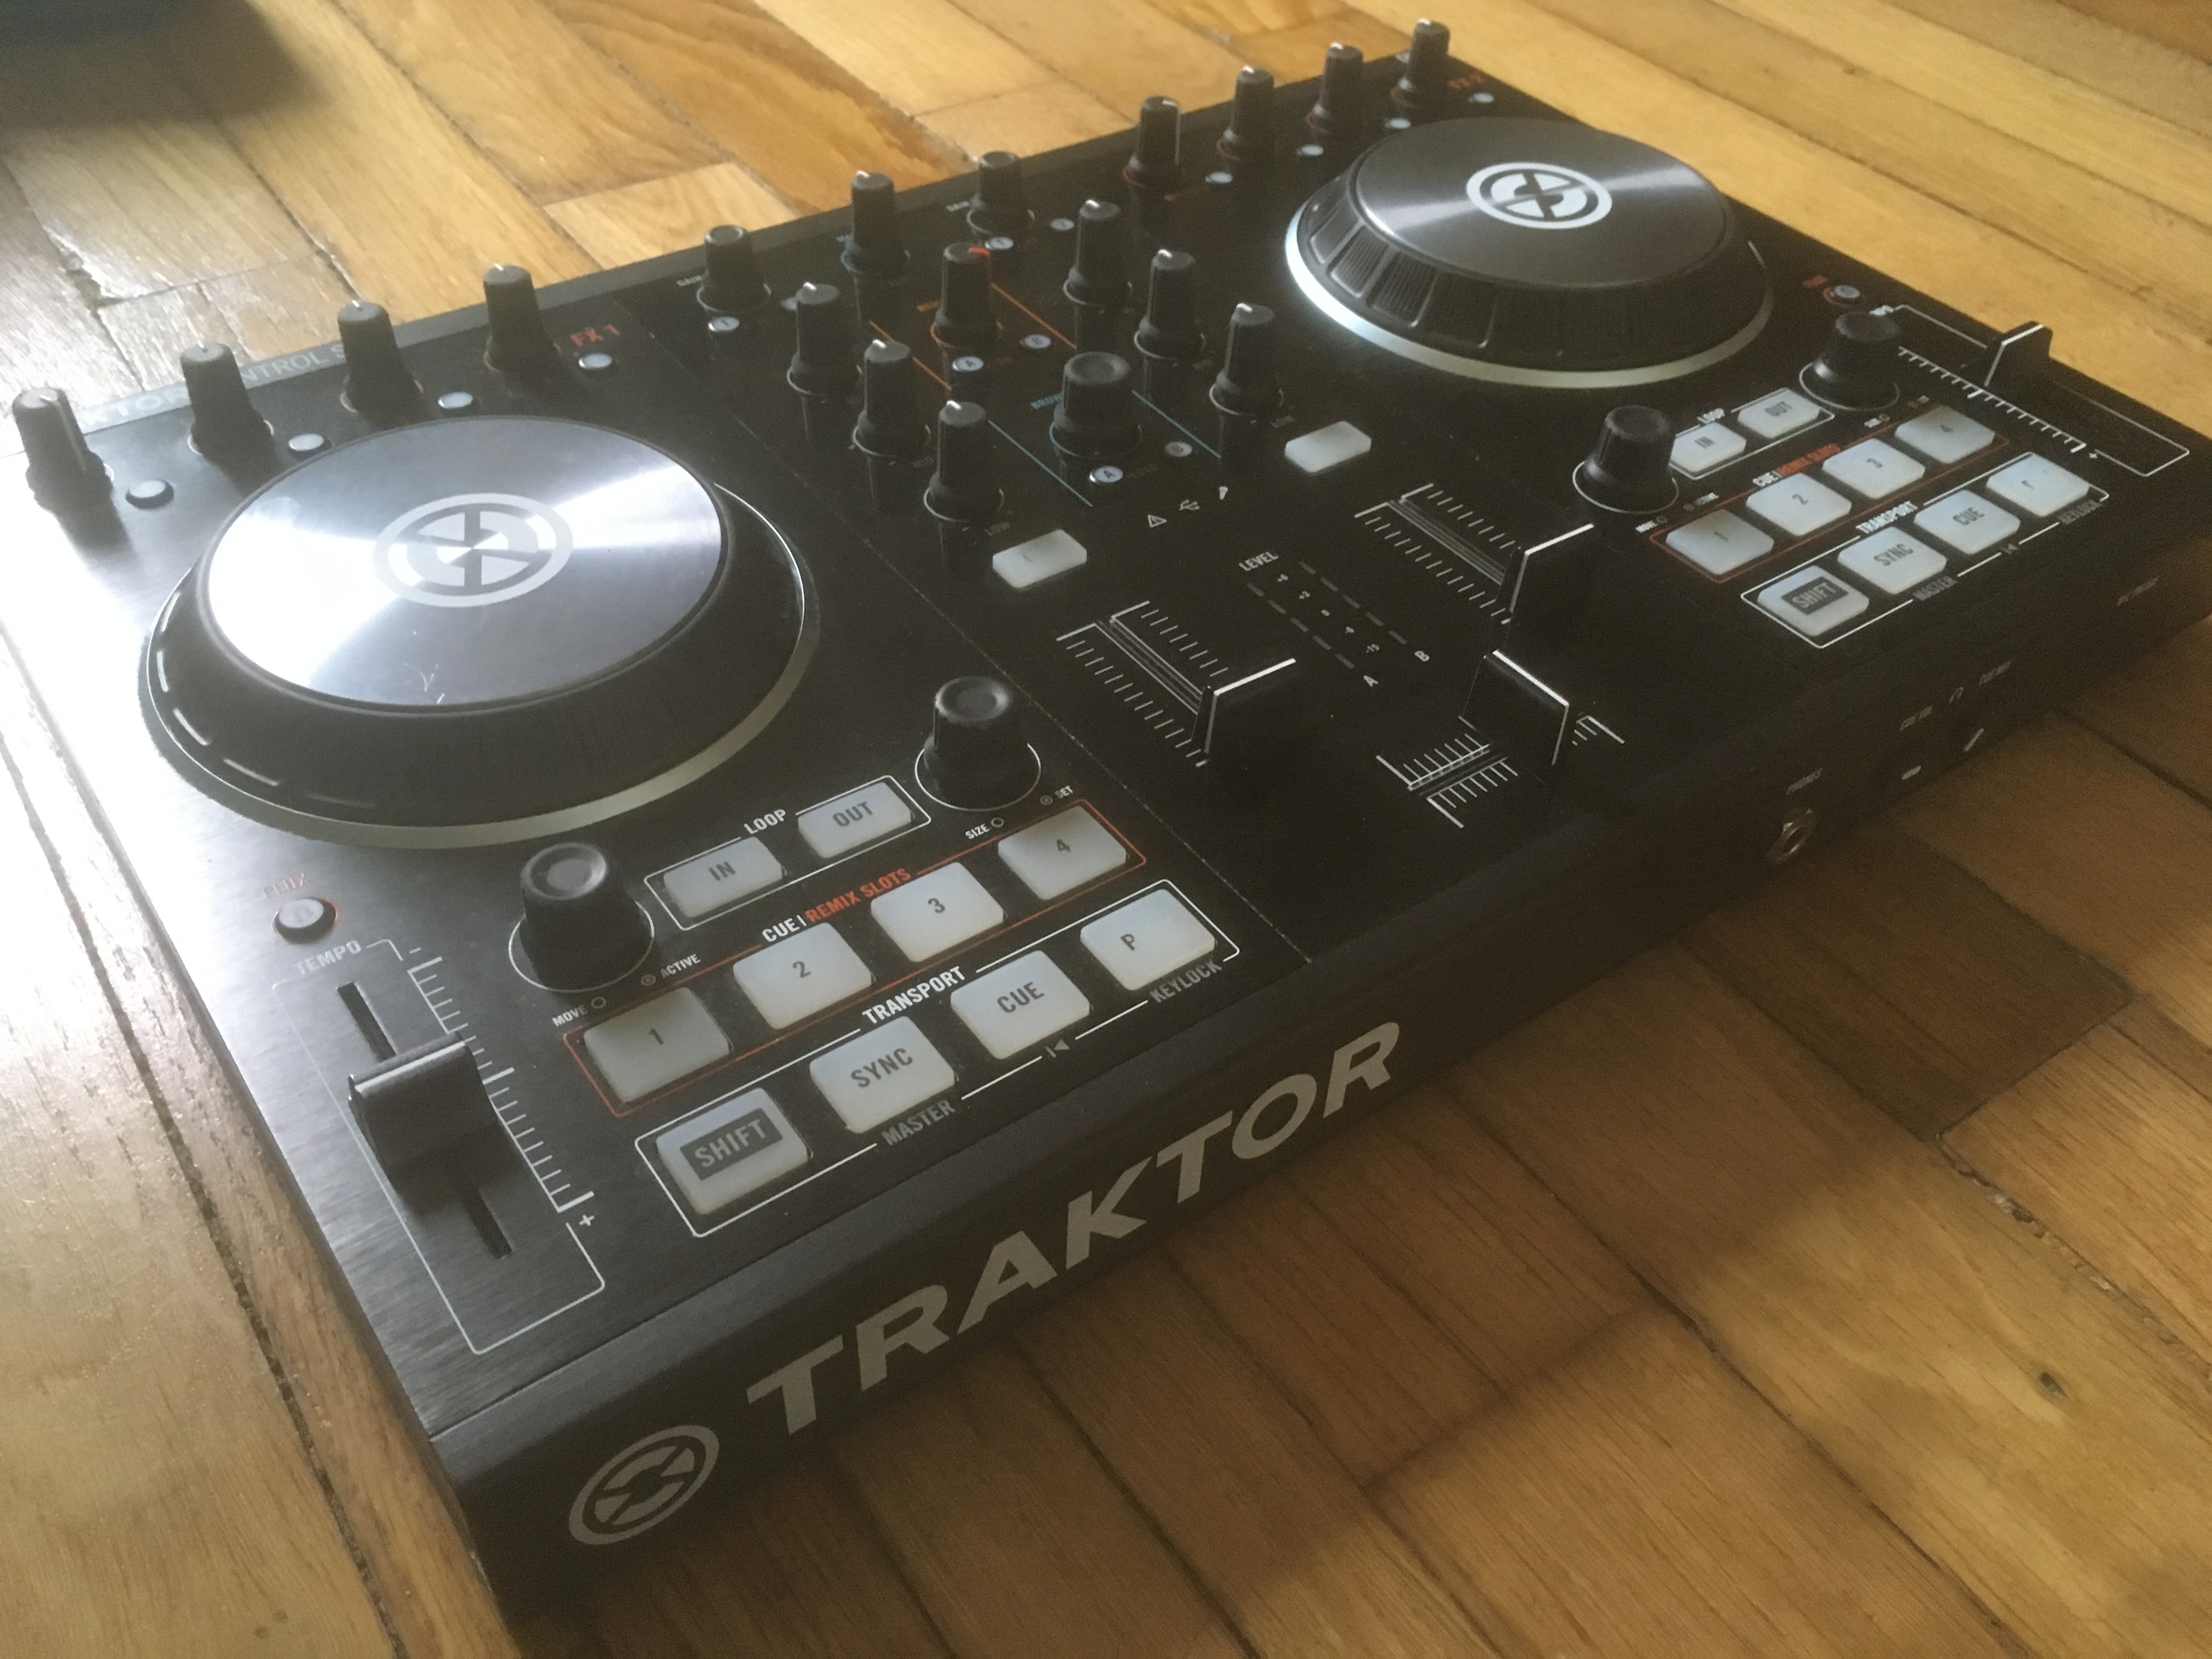 traktor s2 mk2 usb cable replacement